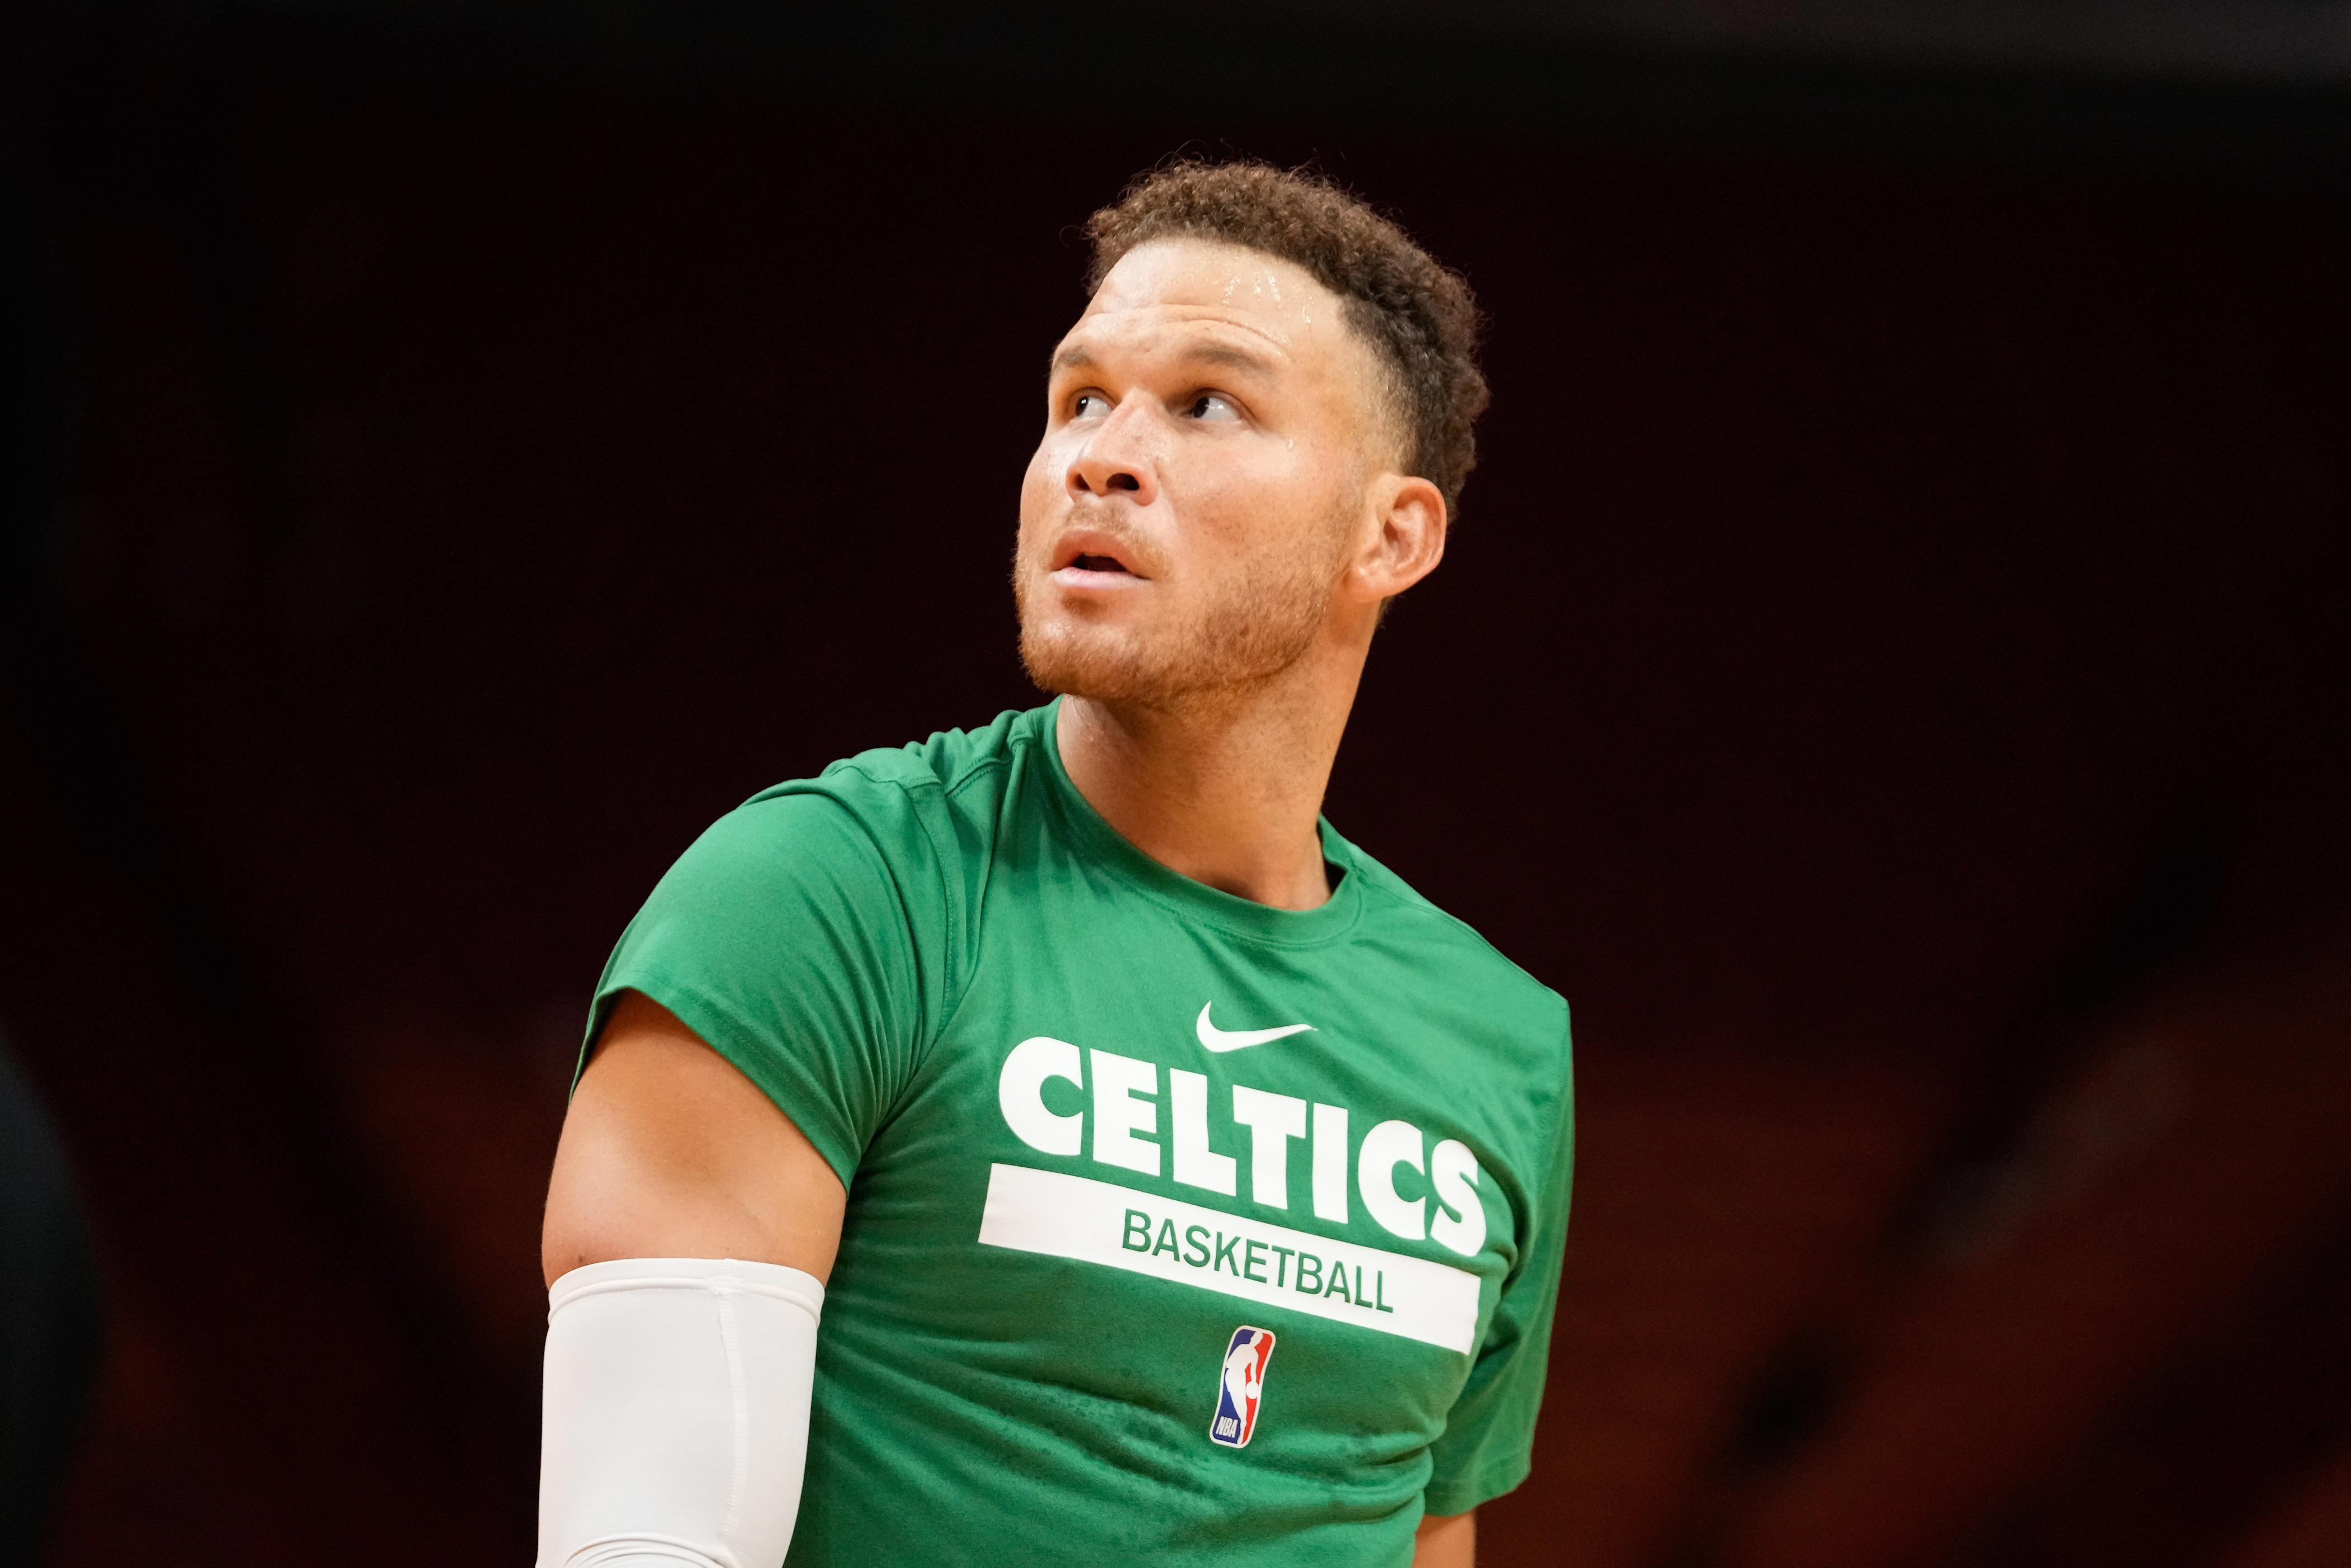 blake griffin calls time on his career, retires a celtic